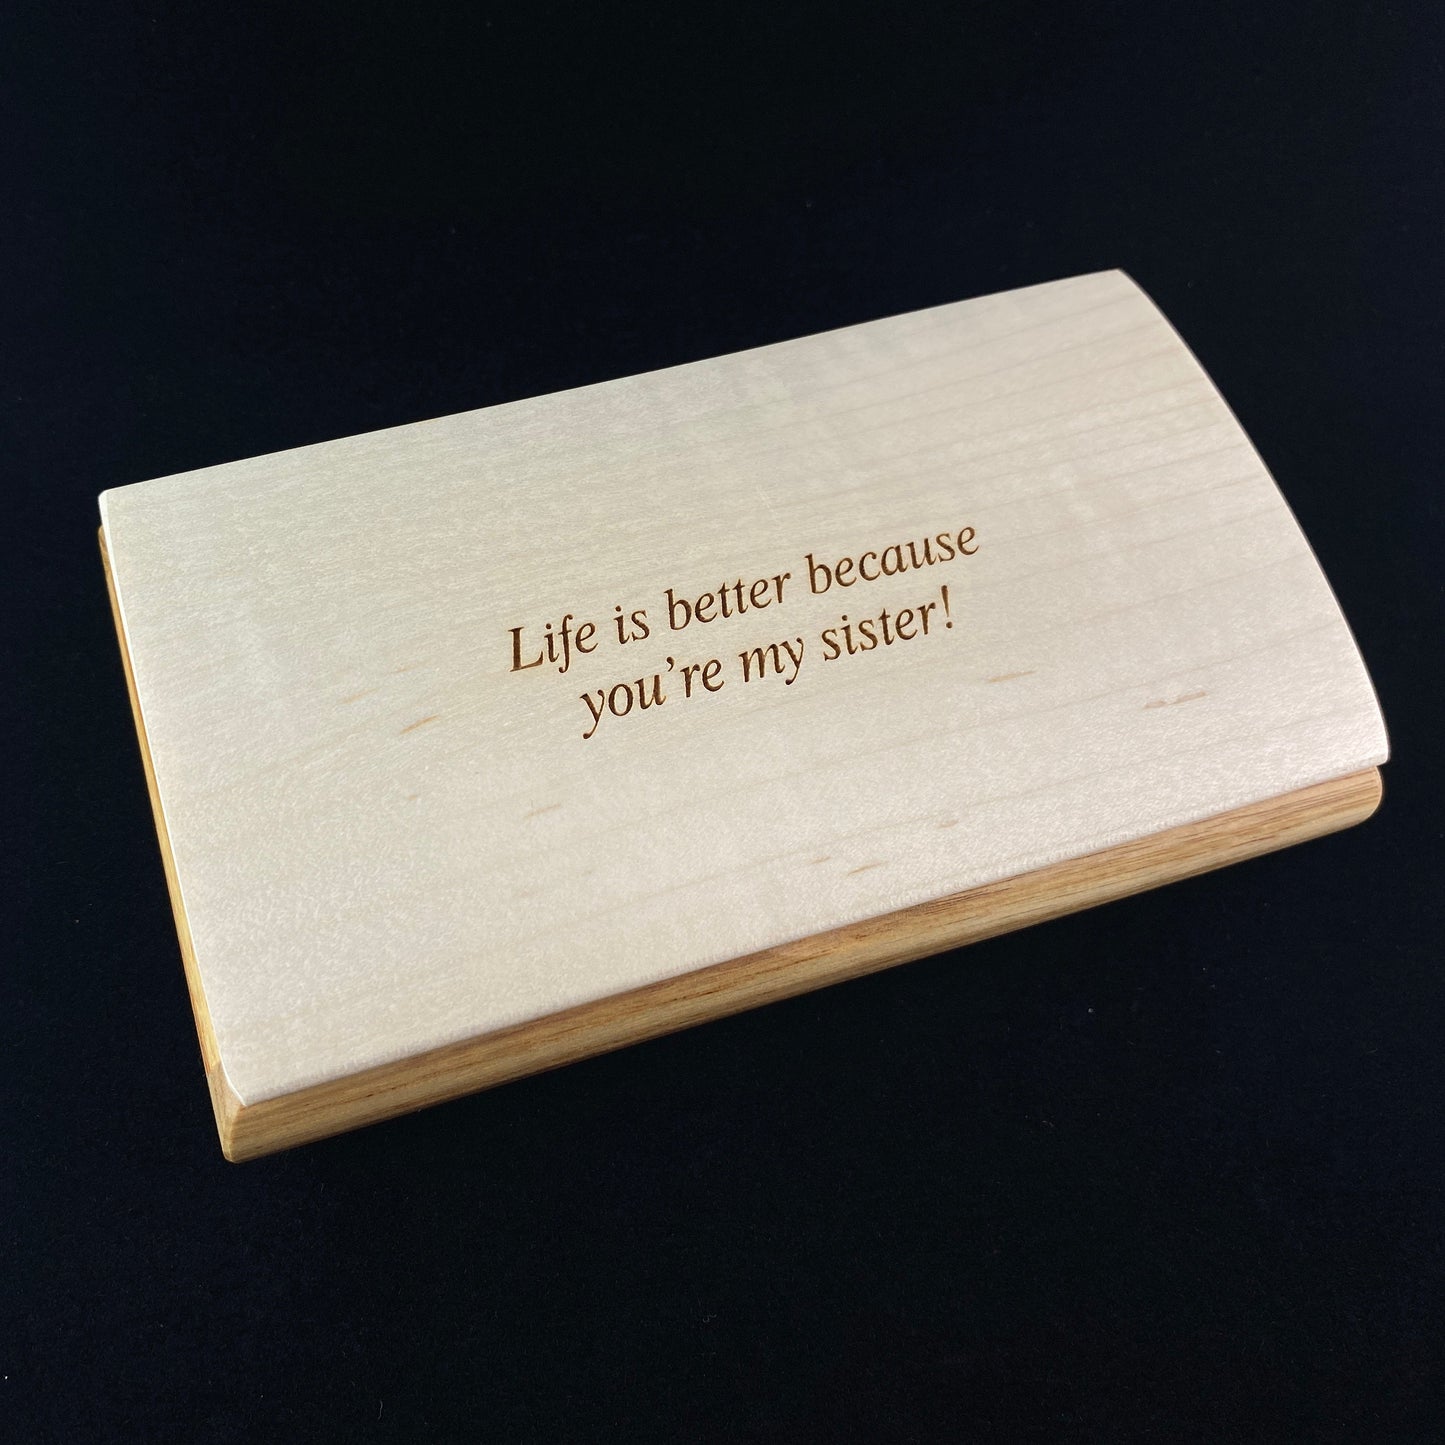 Life is Better Quote Box from Mikutowski Woodworking Handmade Wooden Box with Canarywood and Curly Maple